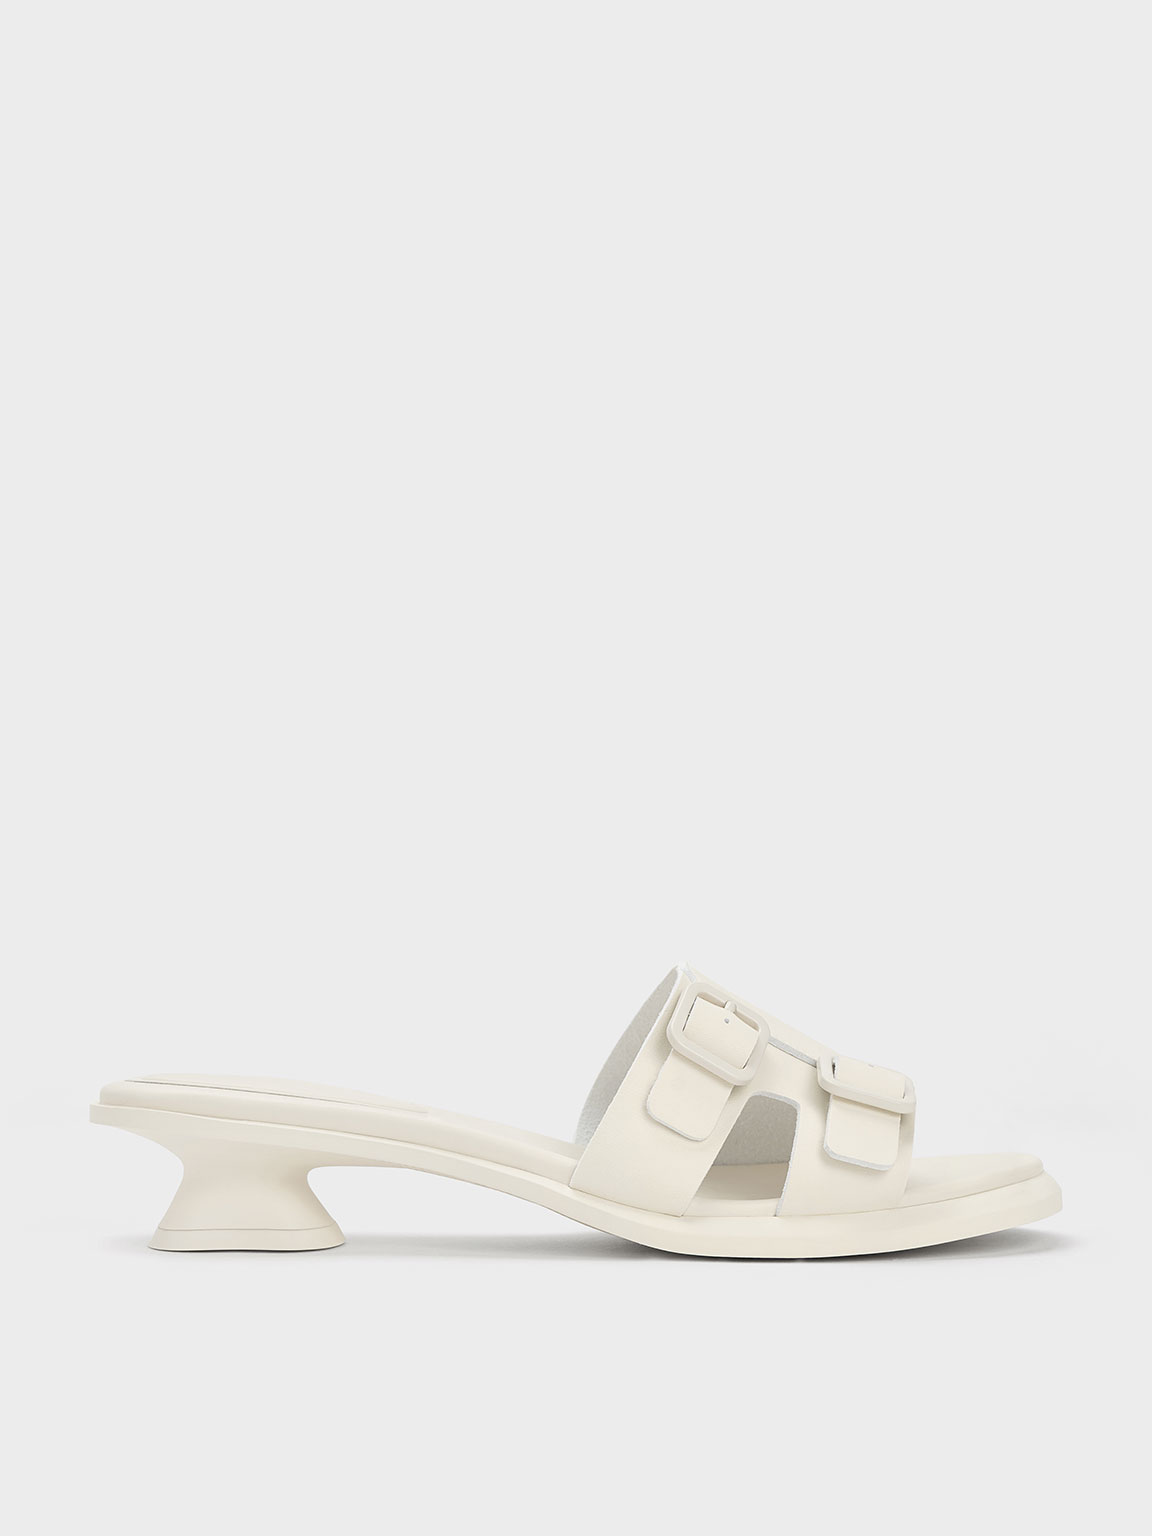 Charles & Keith Double Buckle Sculptural Mules In Chalk